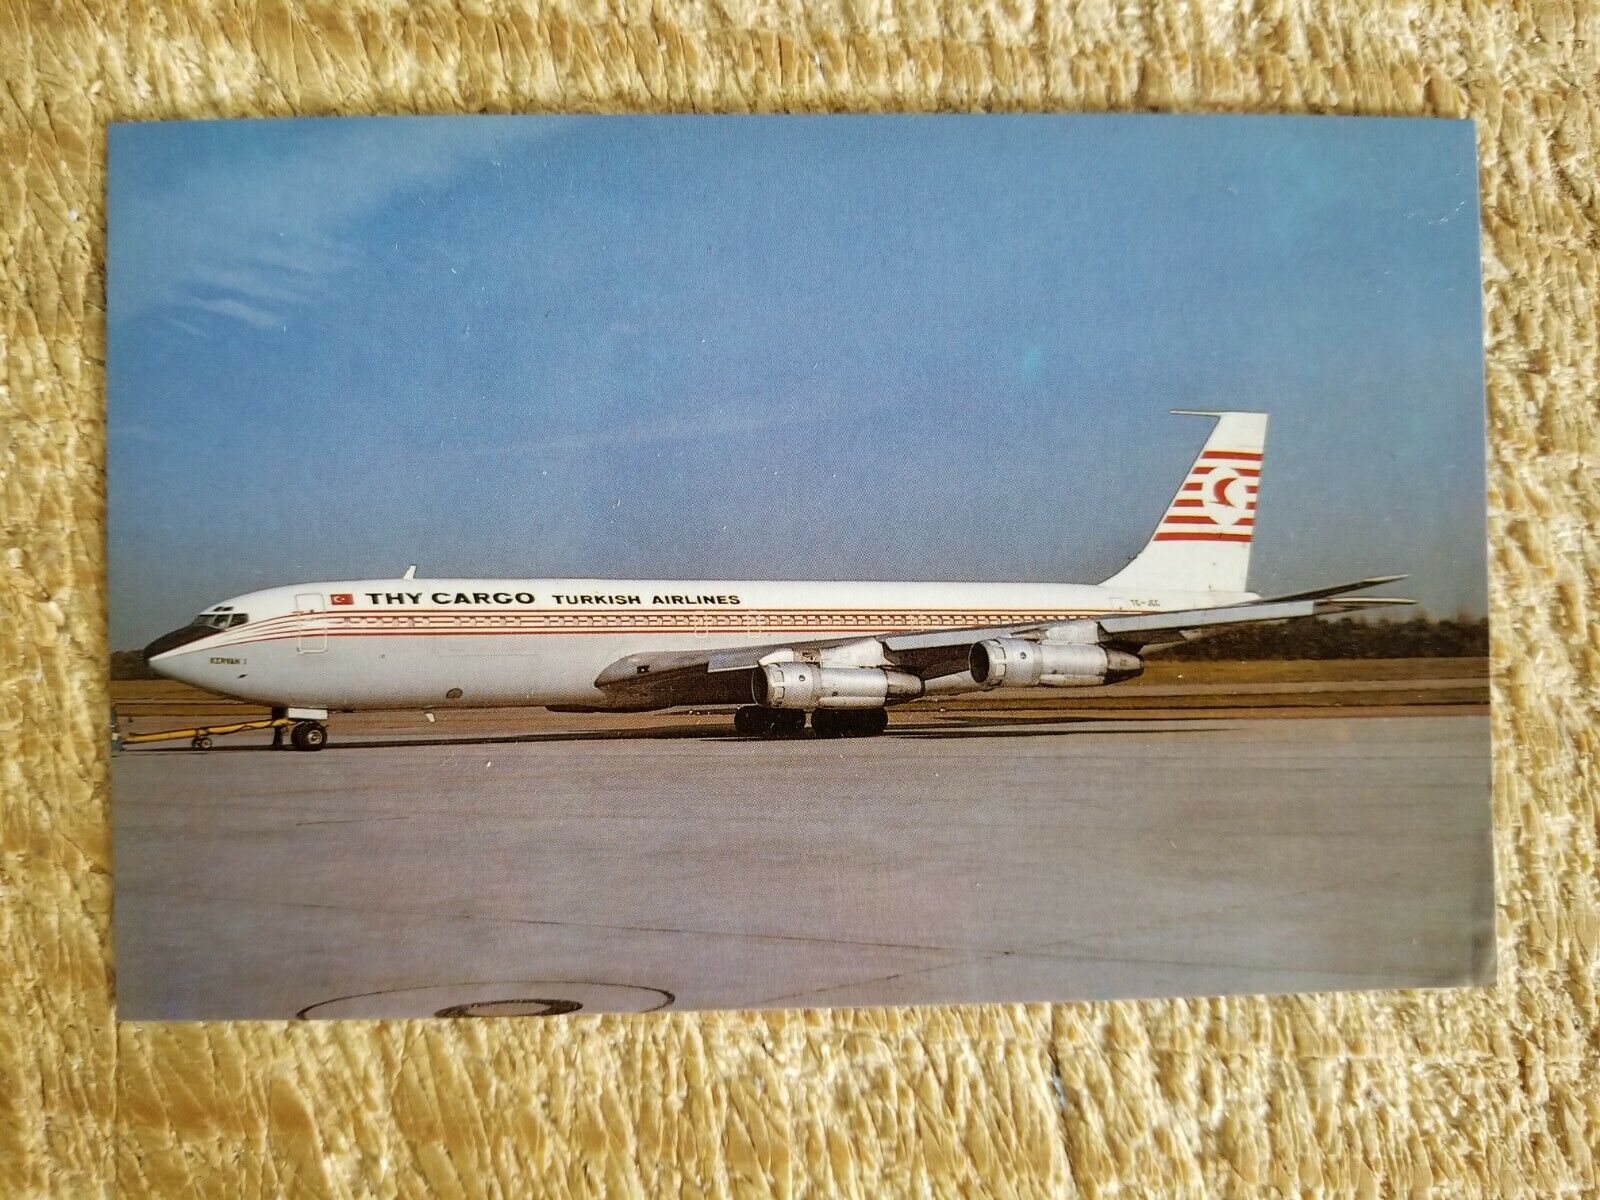 TURKISH AIRLINES THE CARGO BOEING B707-321C IN 1985.VTG AIRCRAFT POSTCARD*P53